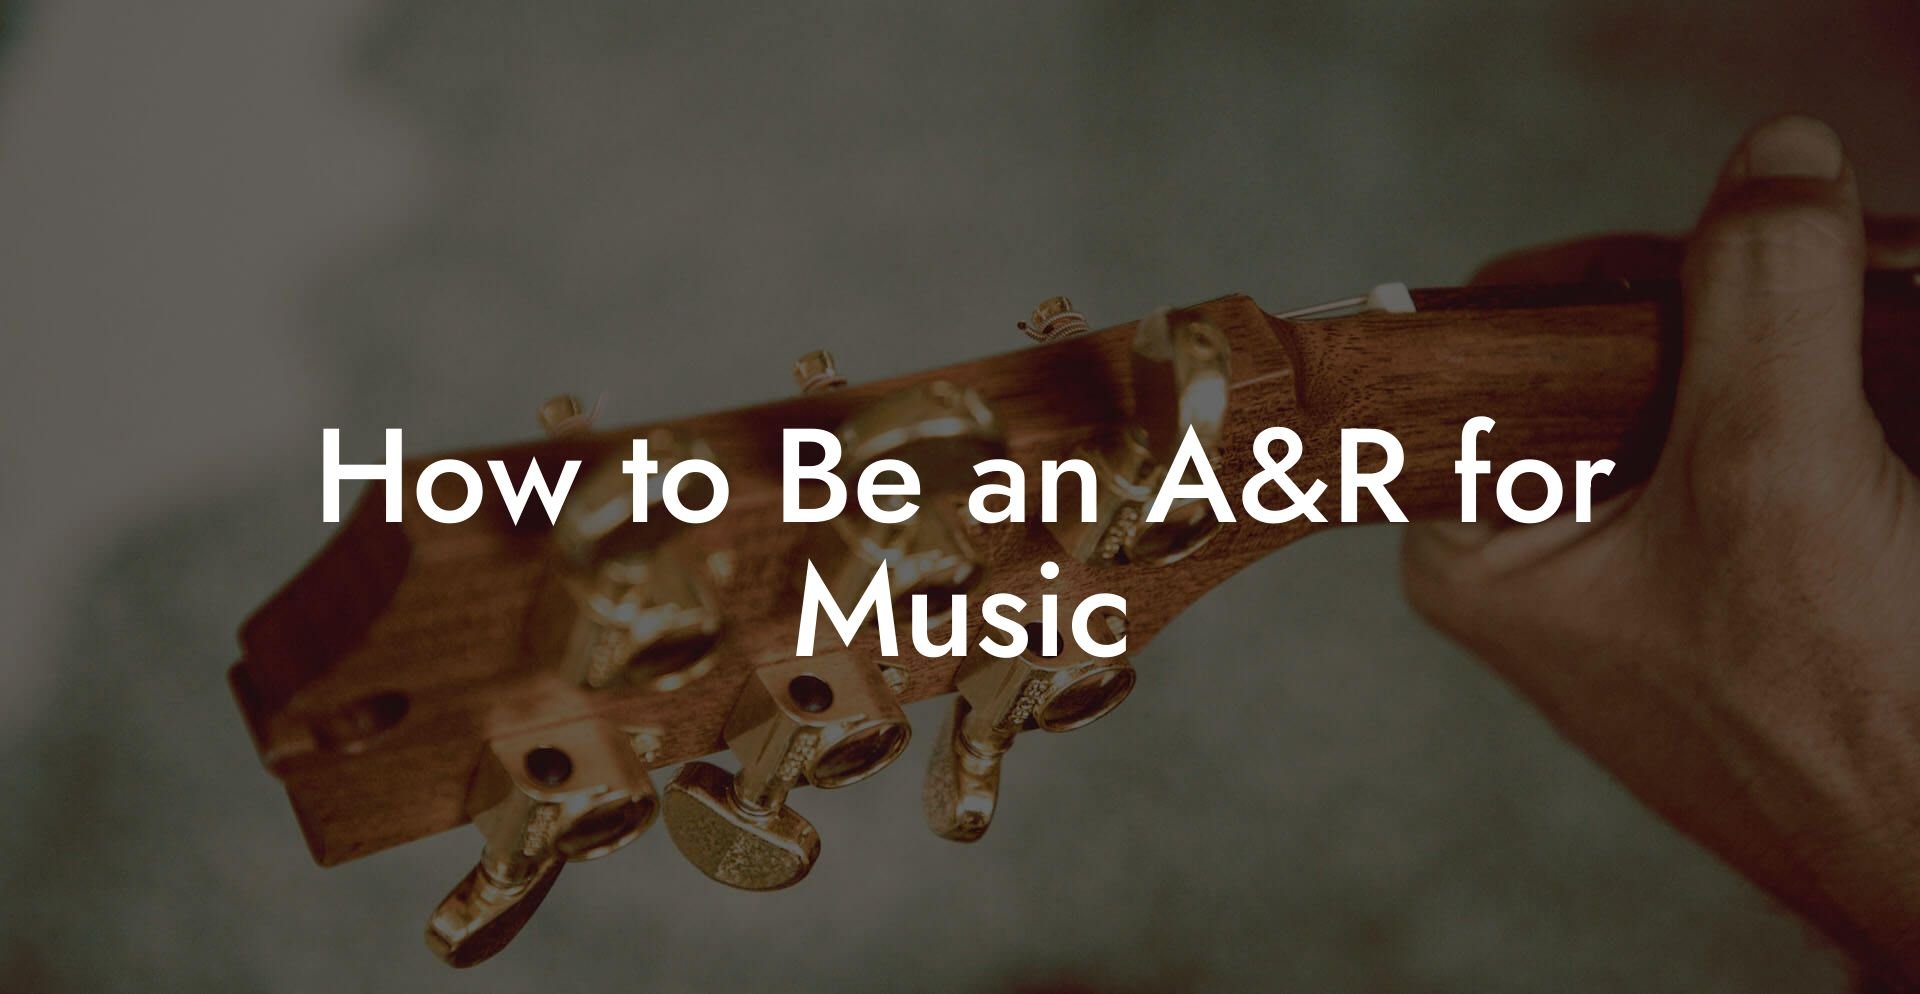 How to Be an A&R for Music